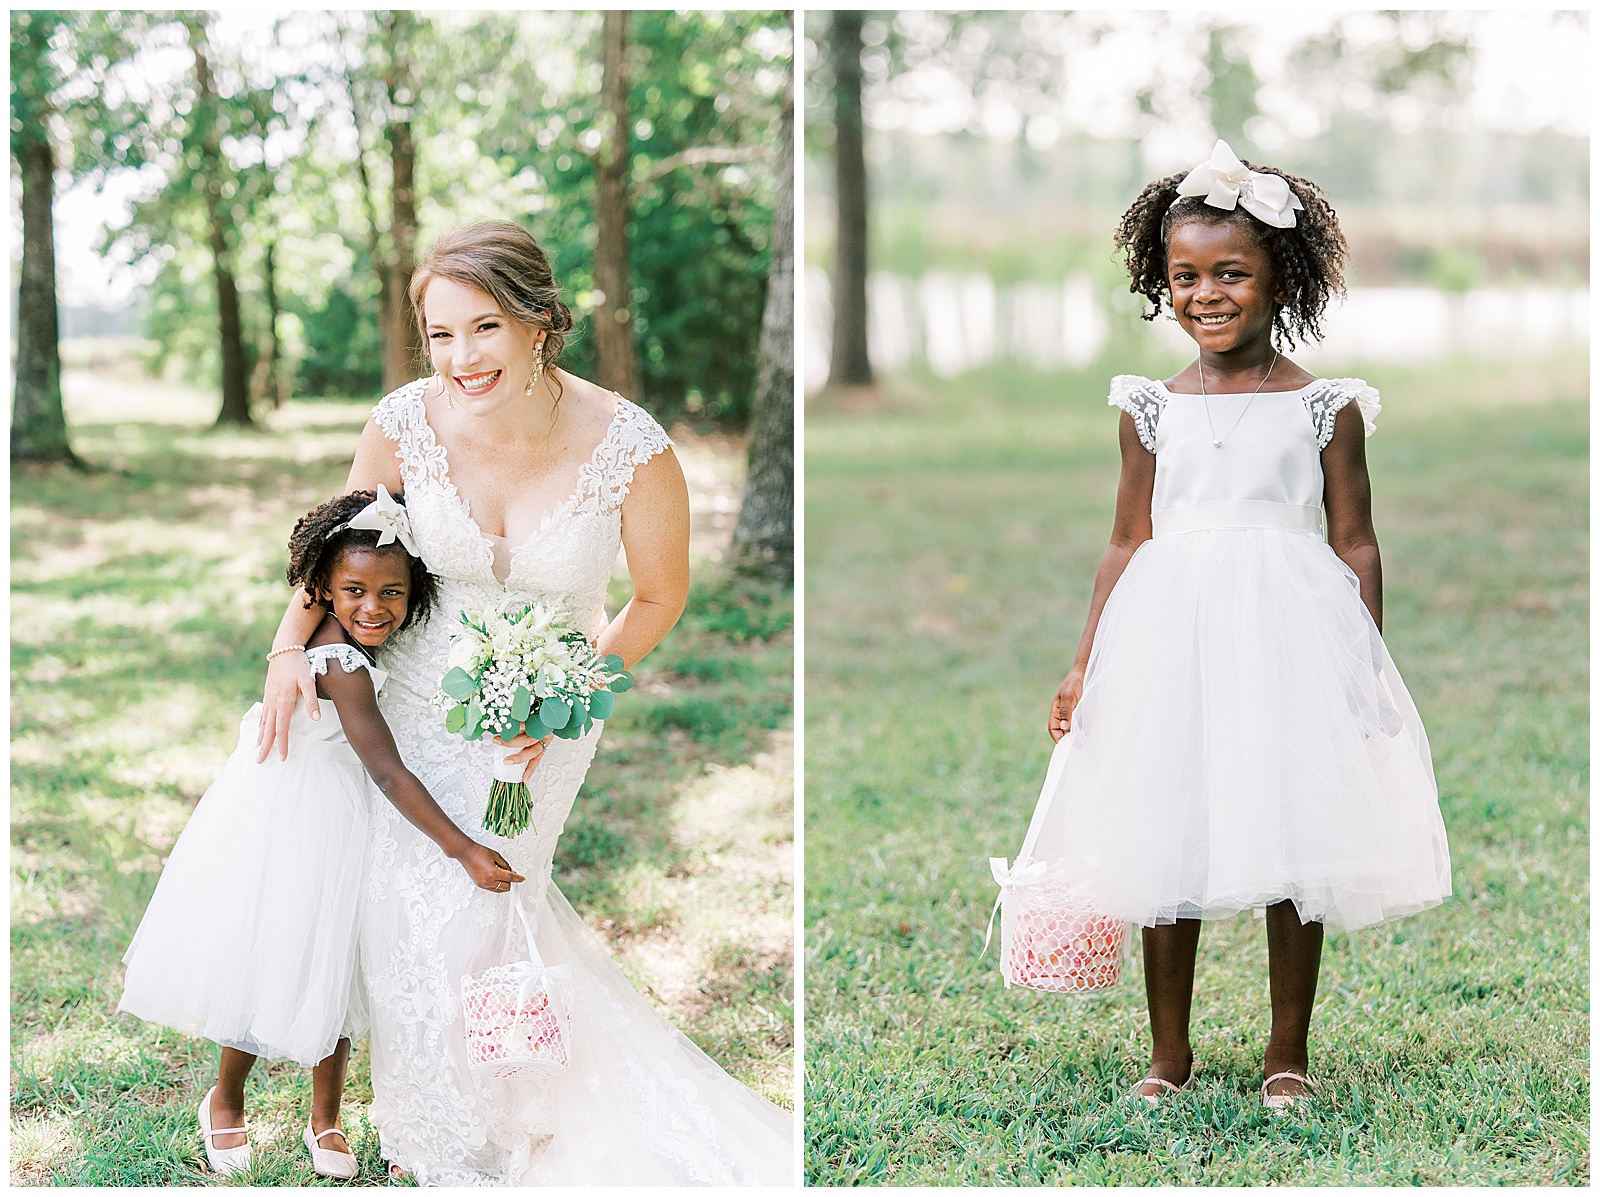 adorable outdoor flower girl portraits in pink and white dresses